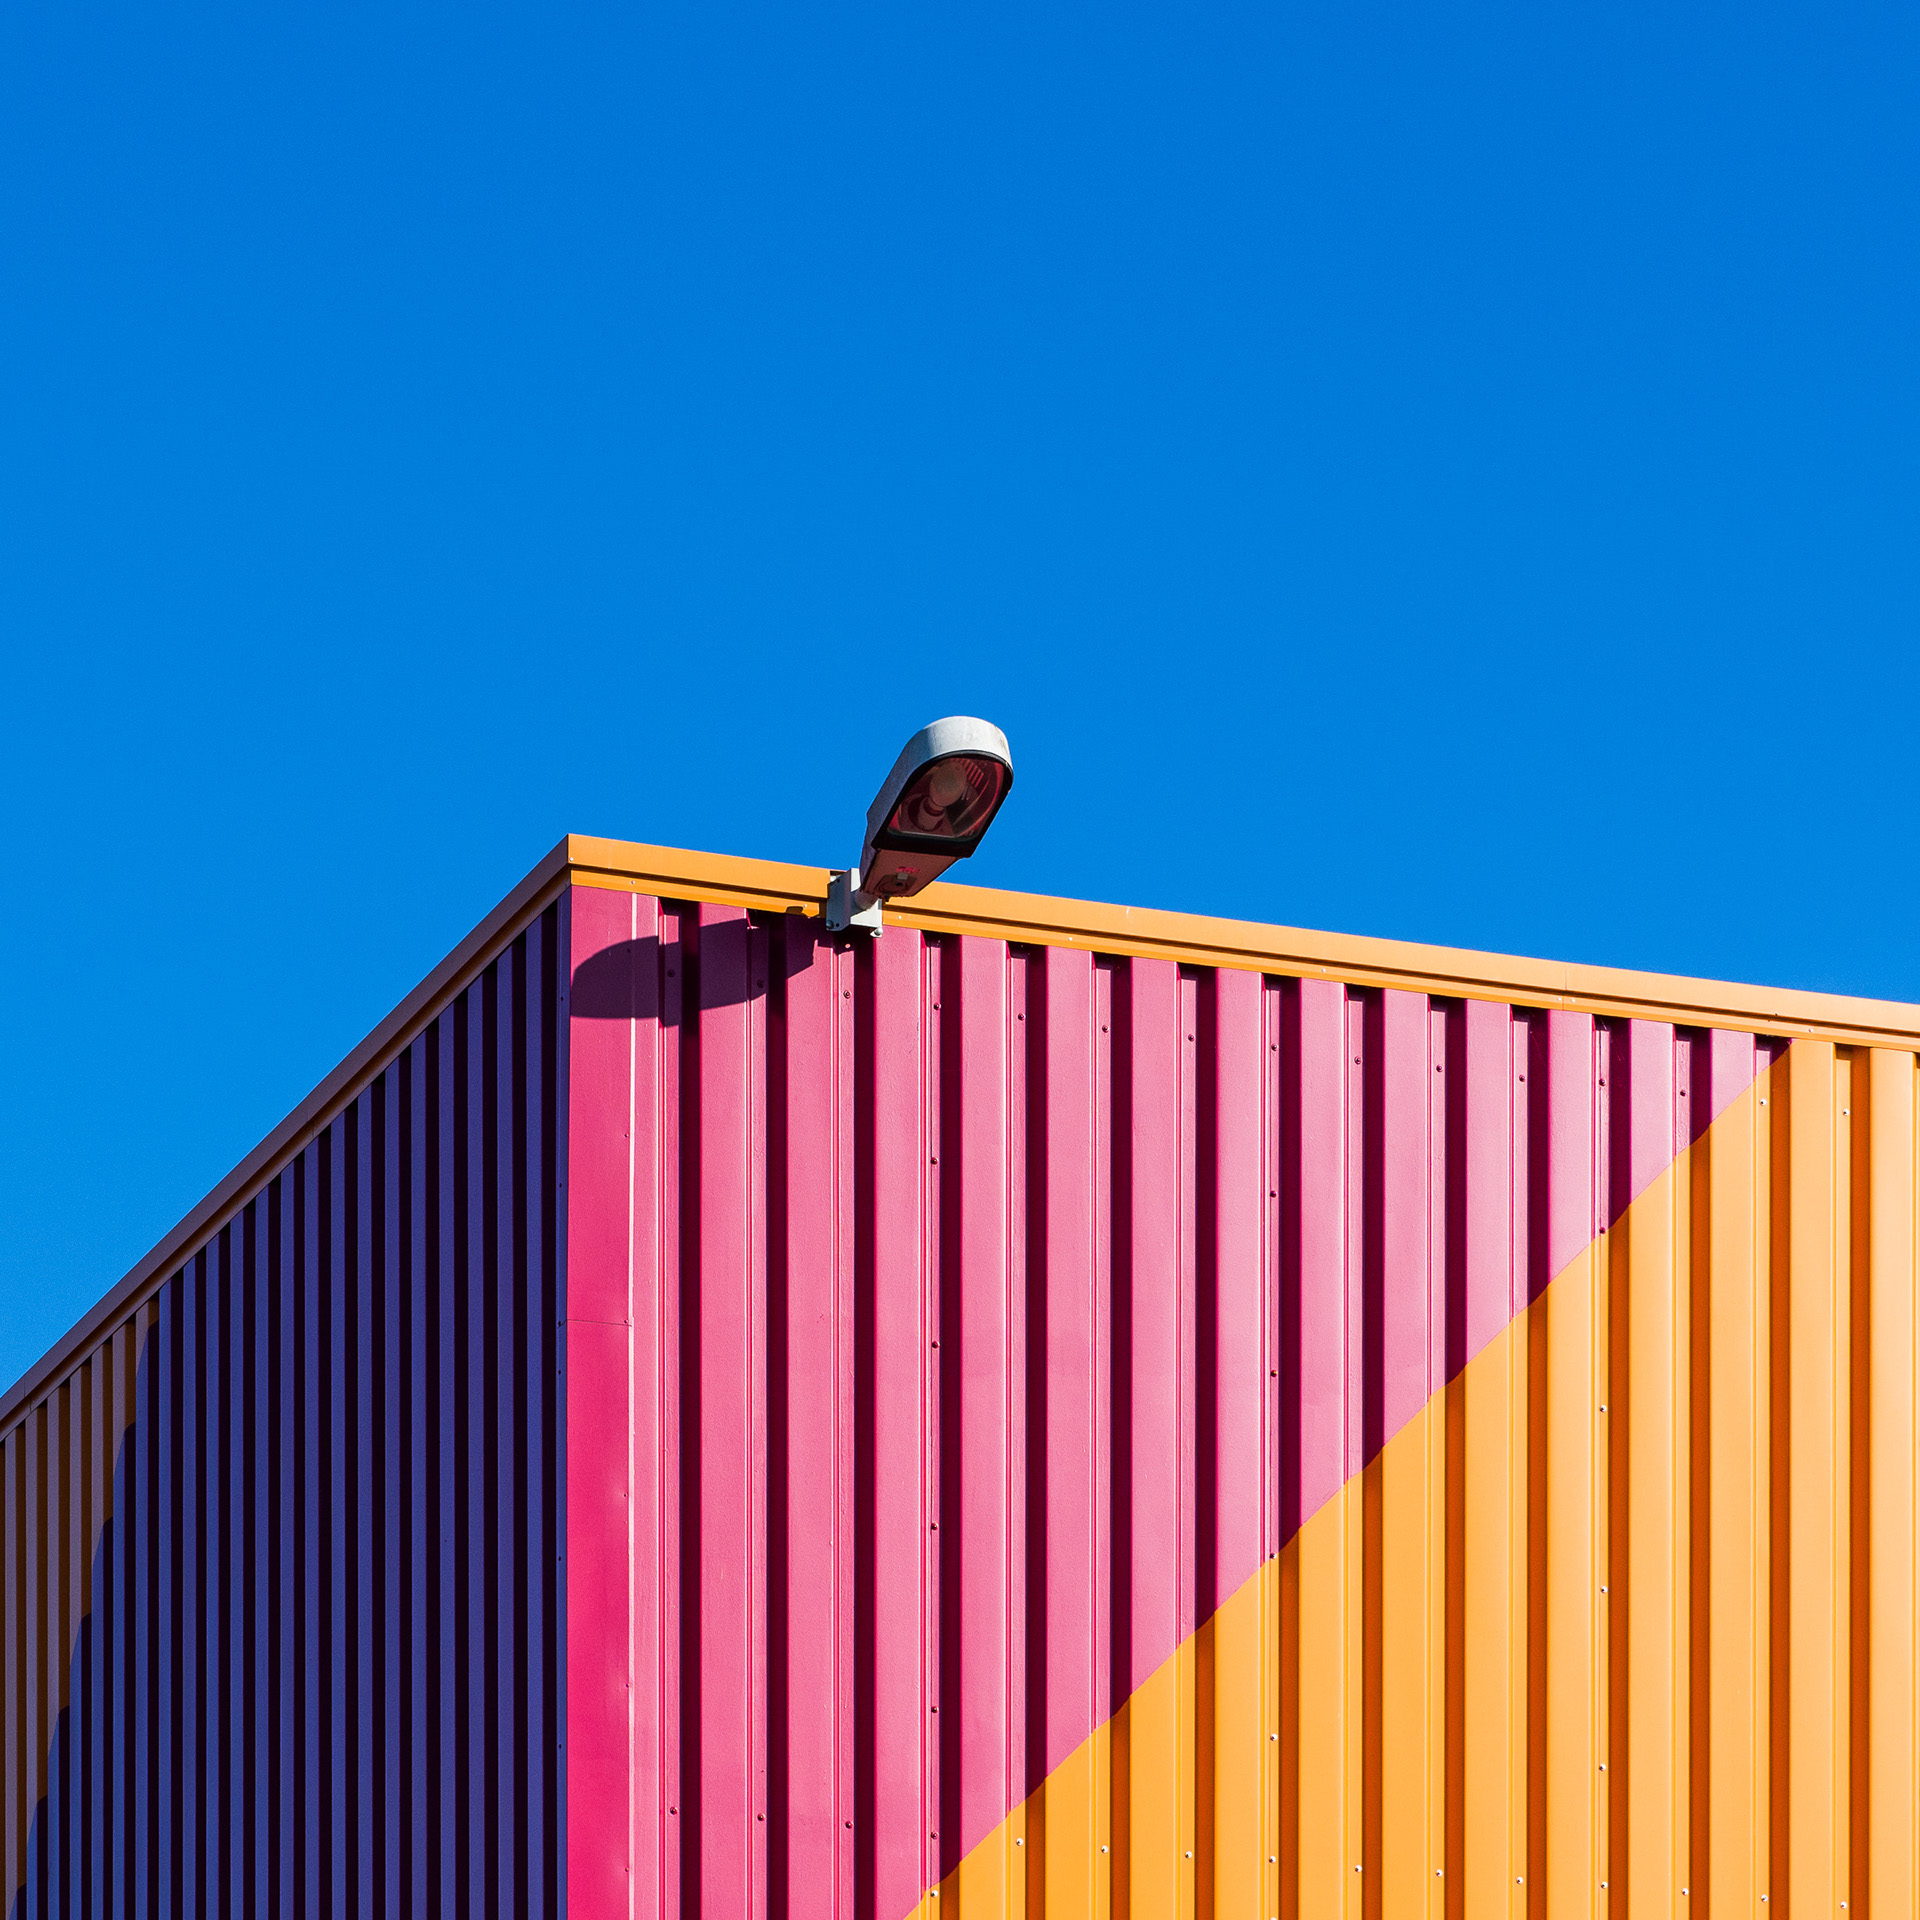 Minimal & Architecture Photography by Andreas Levers